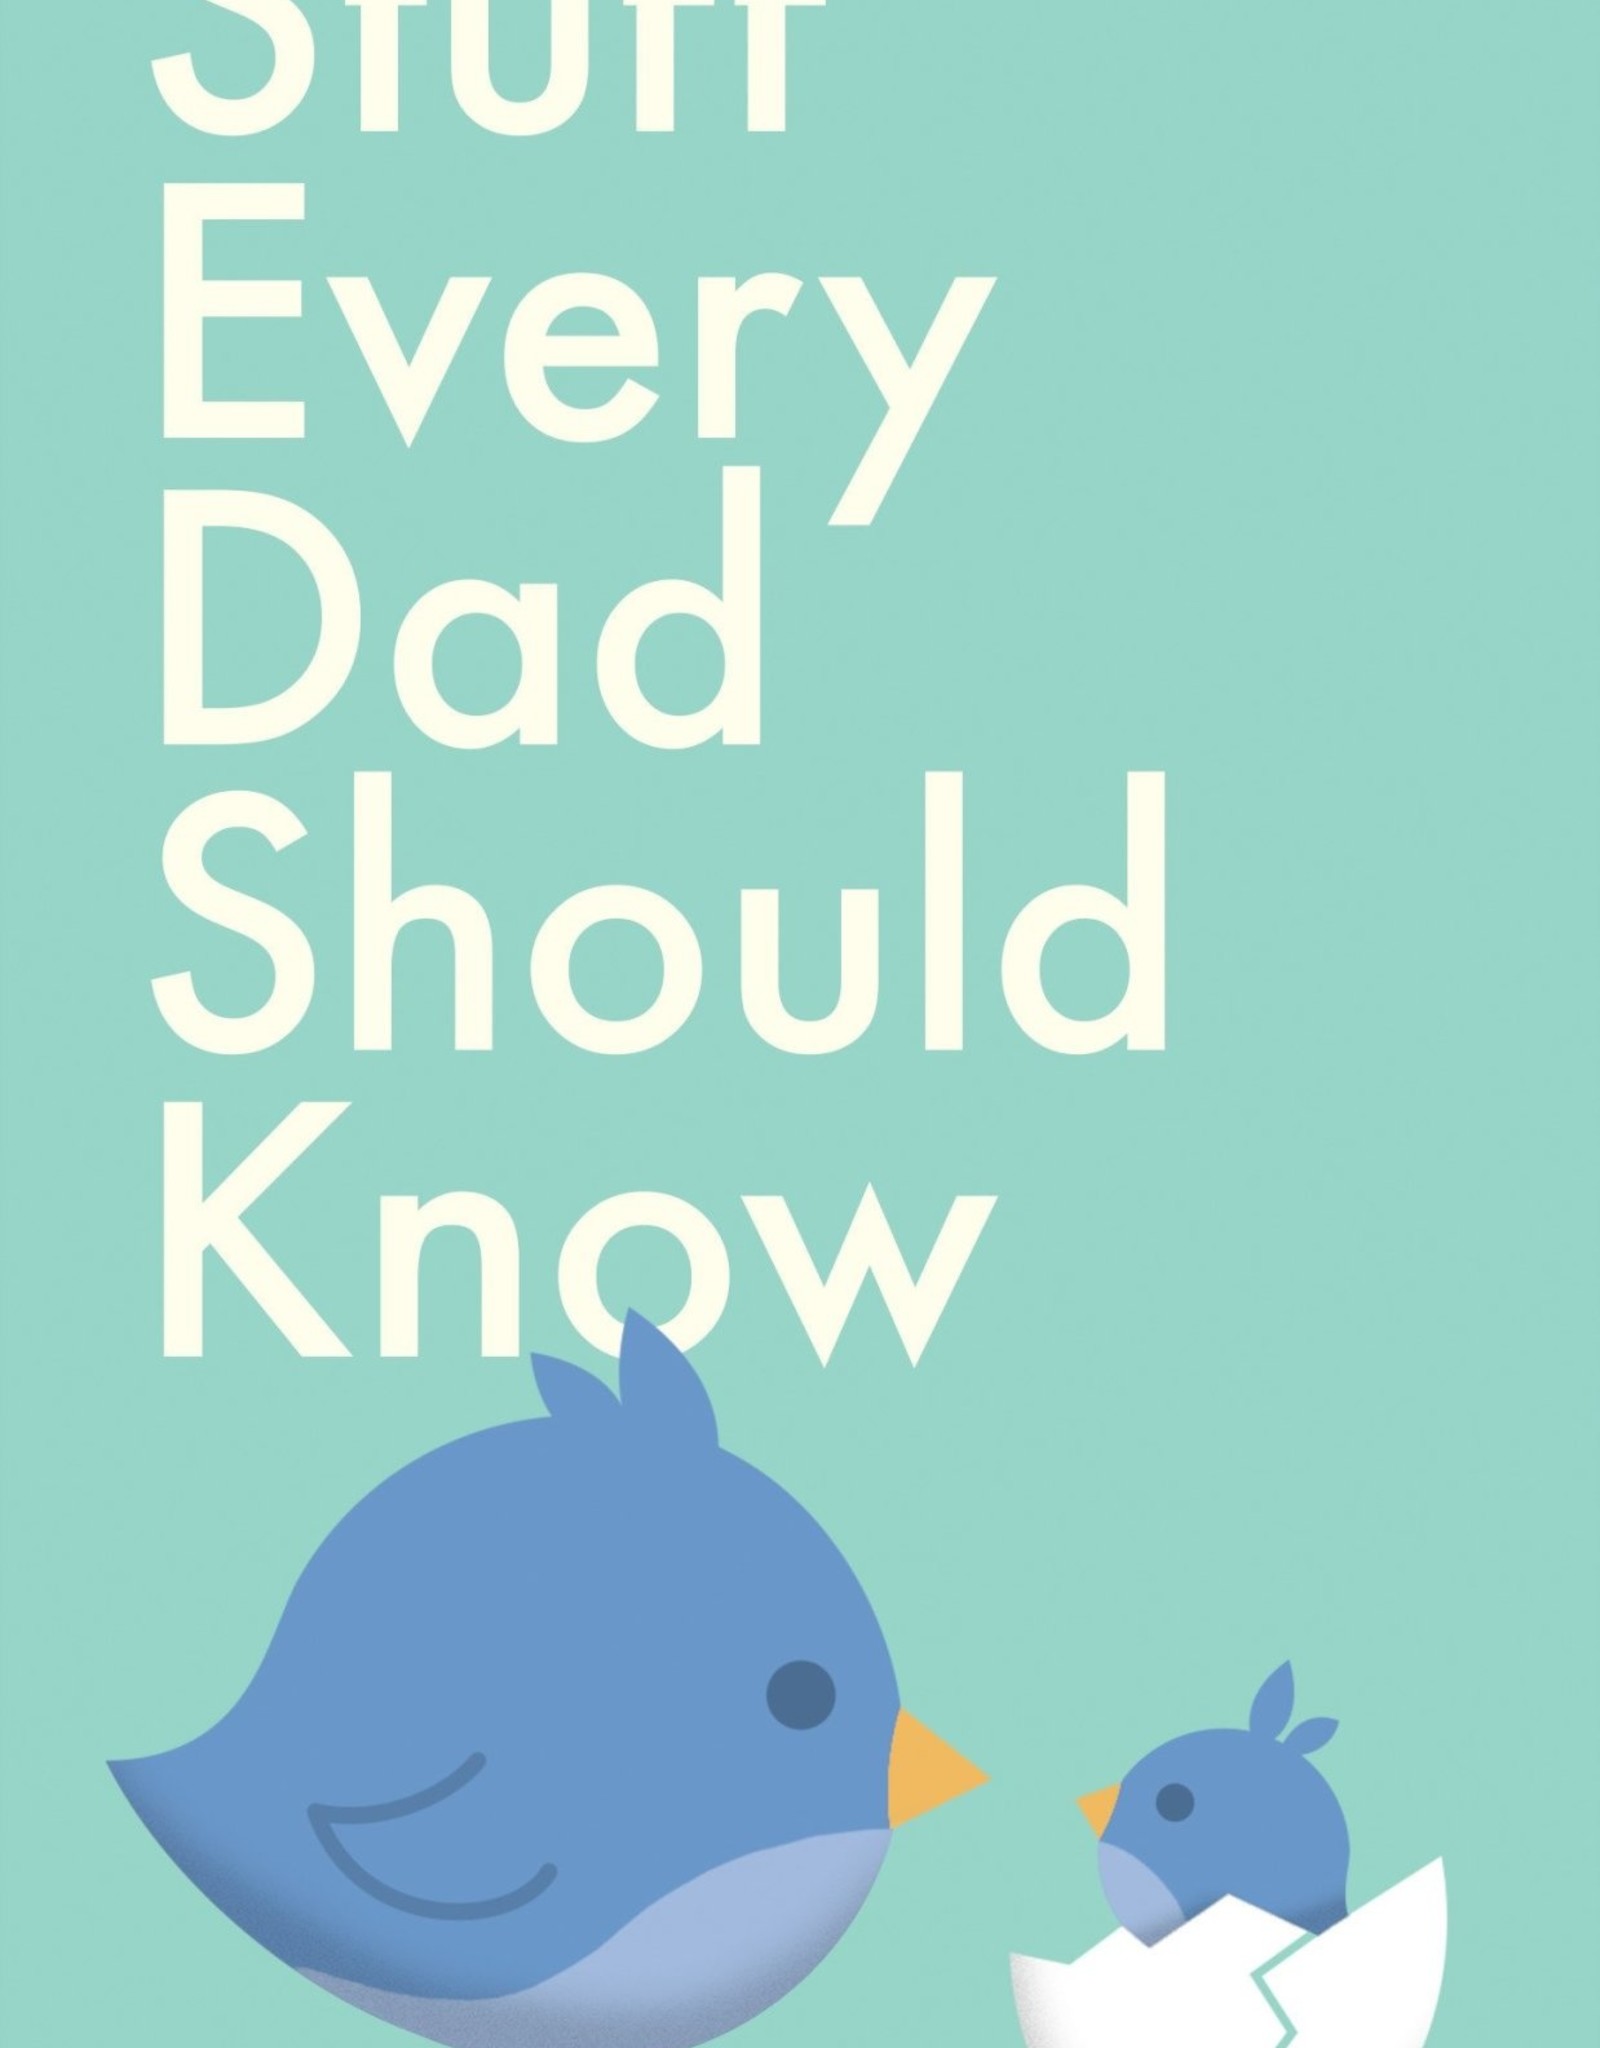 Random House/Penguin STUFF EVERY DAD SHOULD KNOW